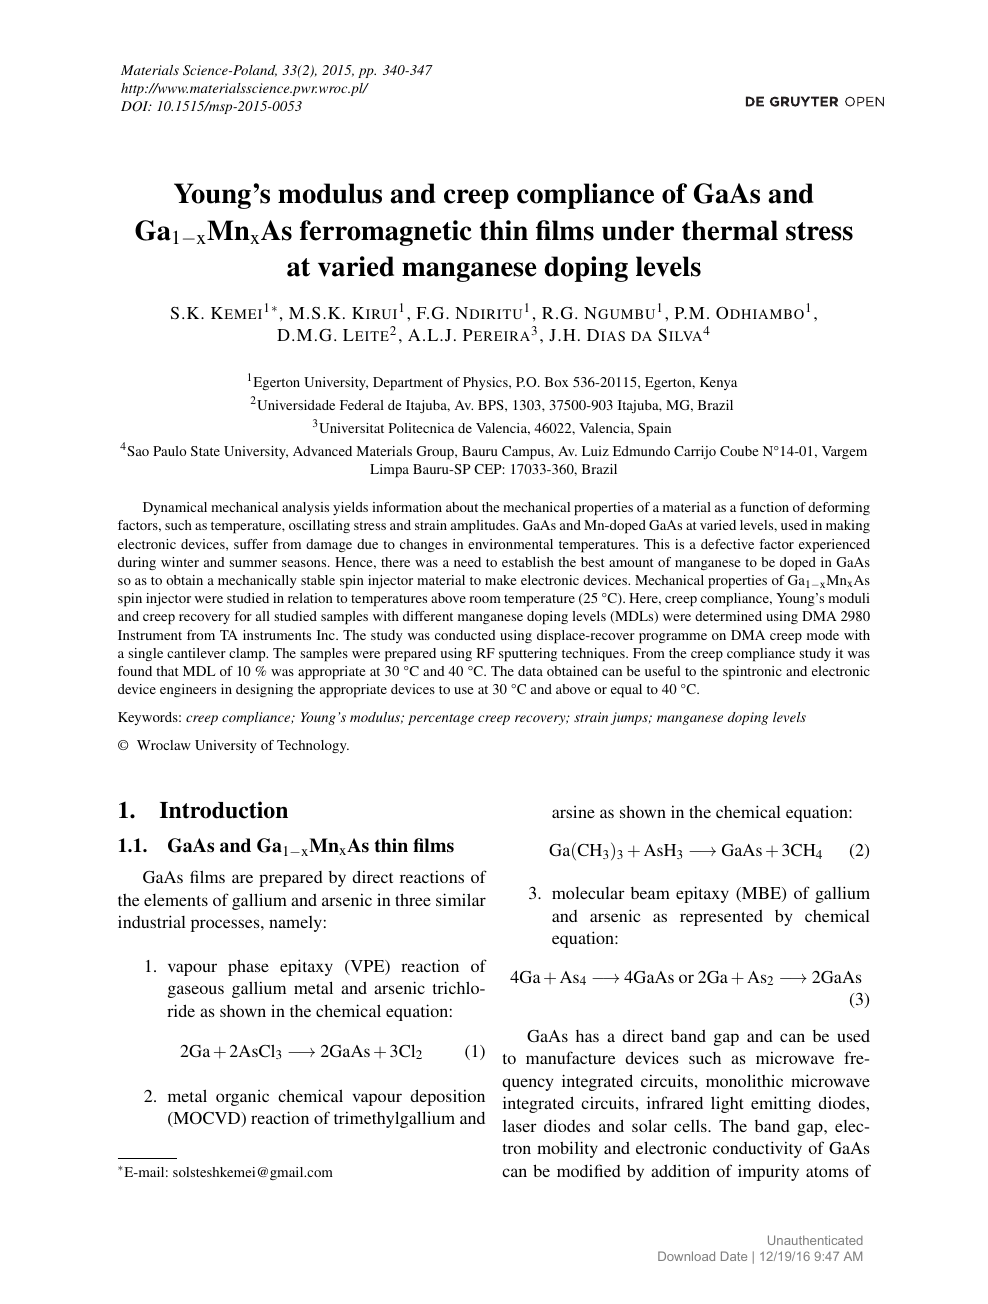 Young S Modulus And Creep Compliance Of Gaas And Ga1 Xmnxas Ferromagnetic Thin Films Under Thermal Stress At Varied Manganese Doping Levels Topic Of Research Paper In Materials Engineering Download Scholarly Article Pdf